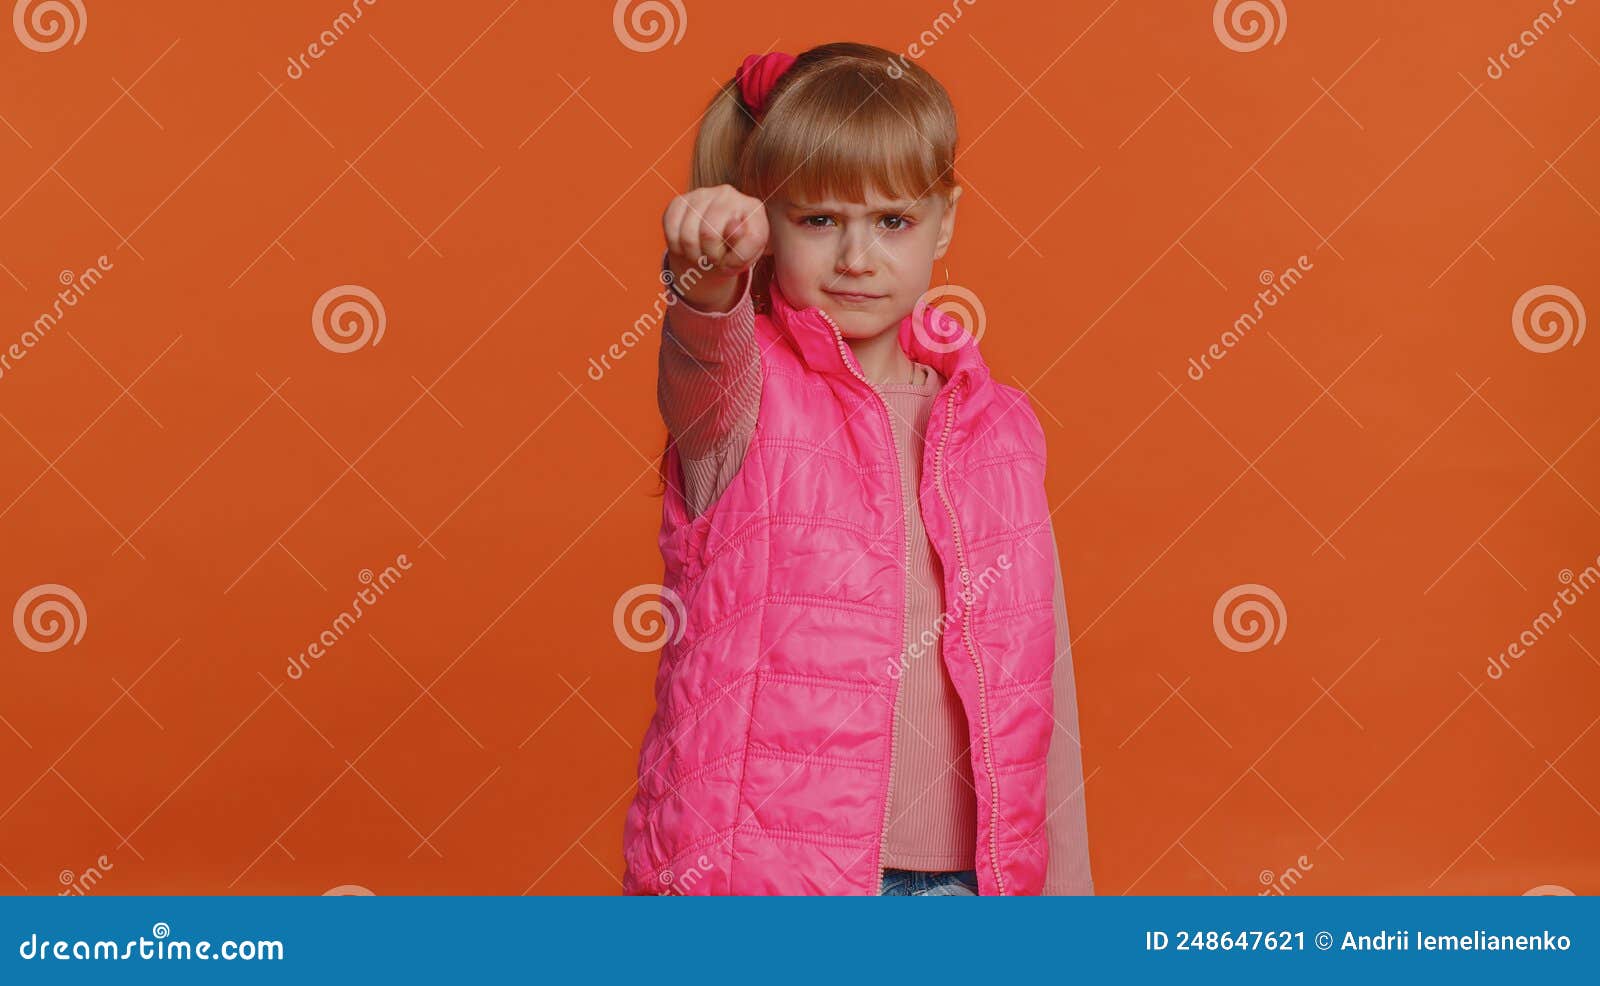 greedy aggressive children girl showing fig negative gesture, refusal fig sign, rapacious avaricious